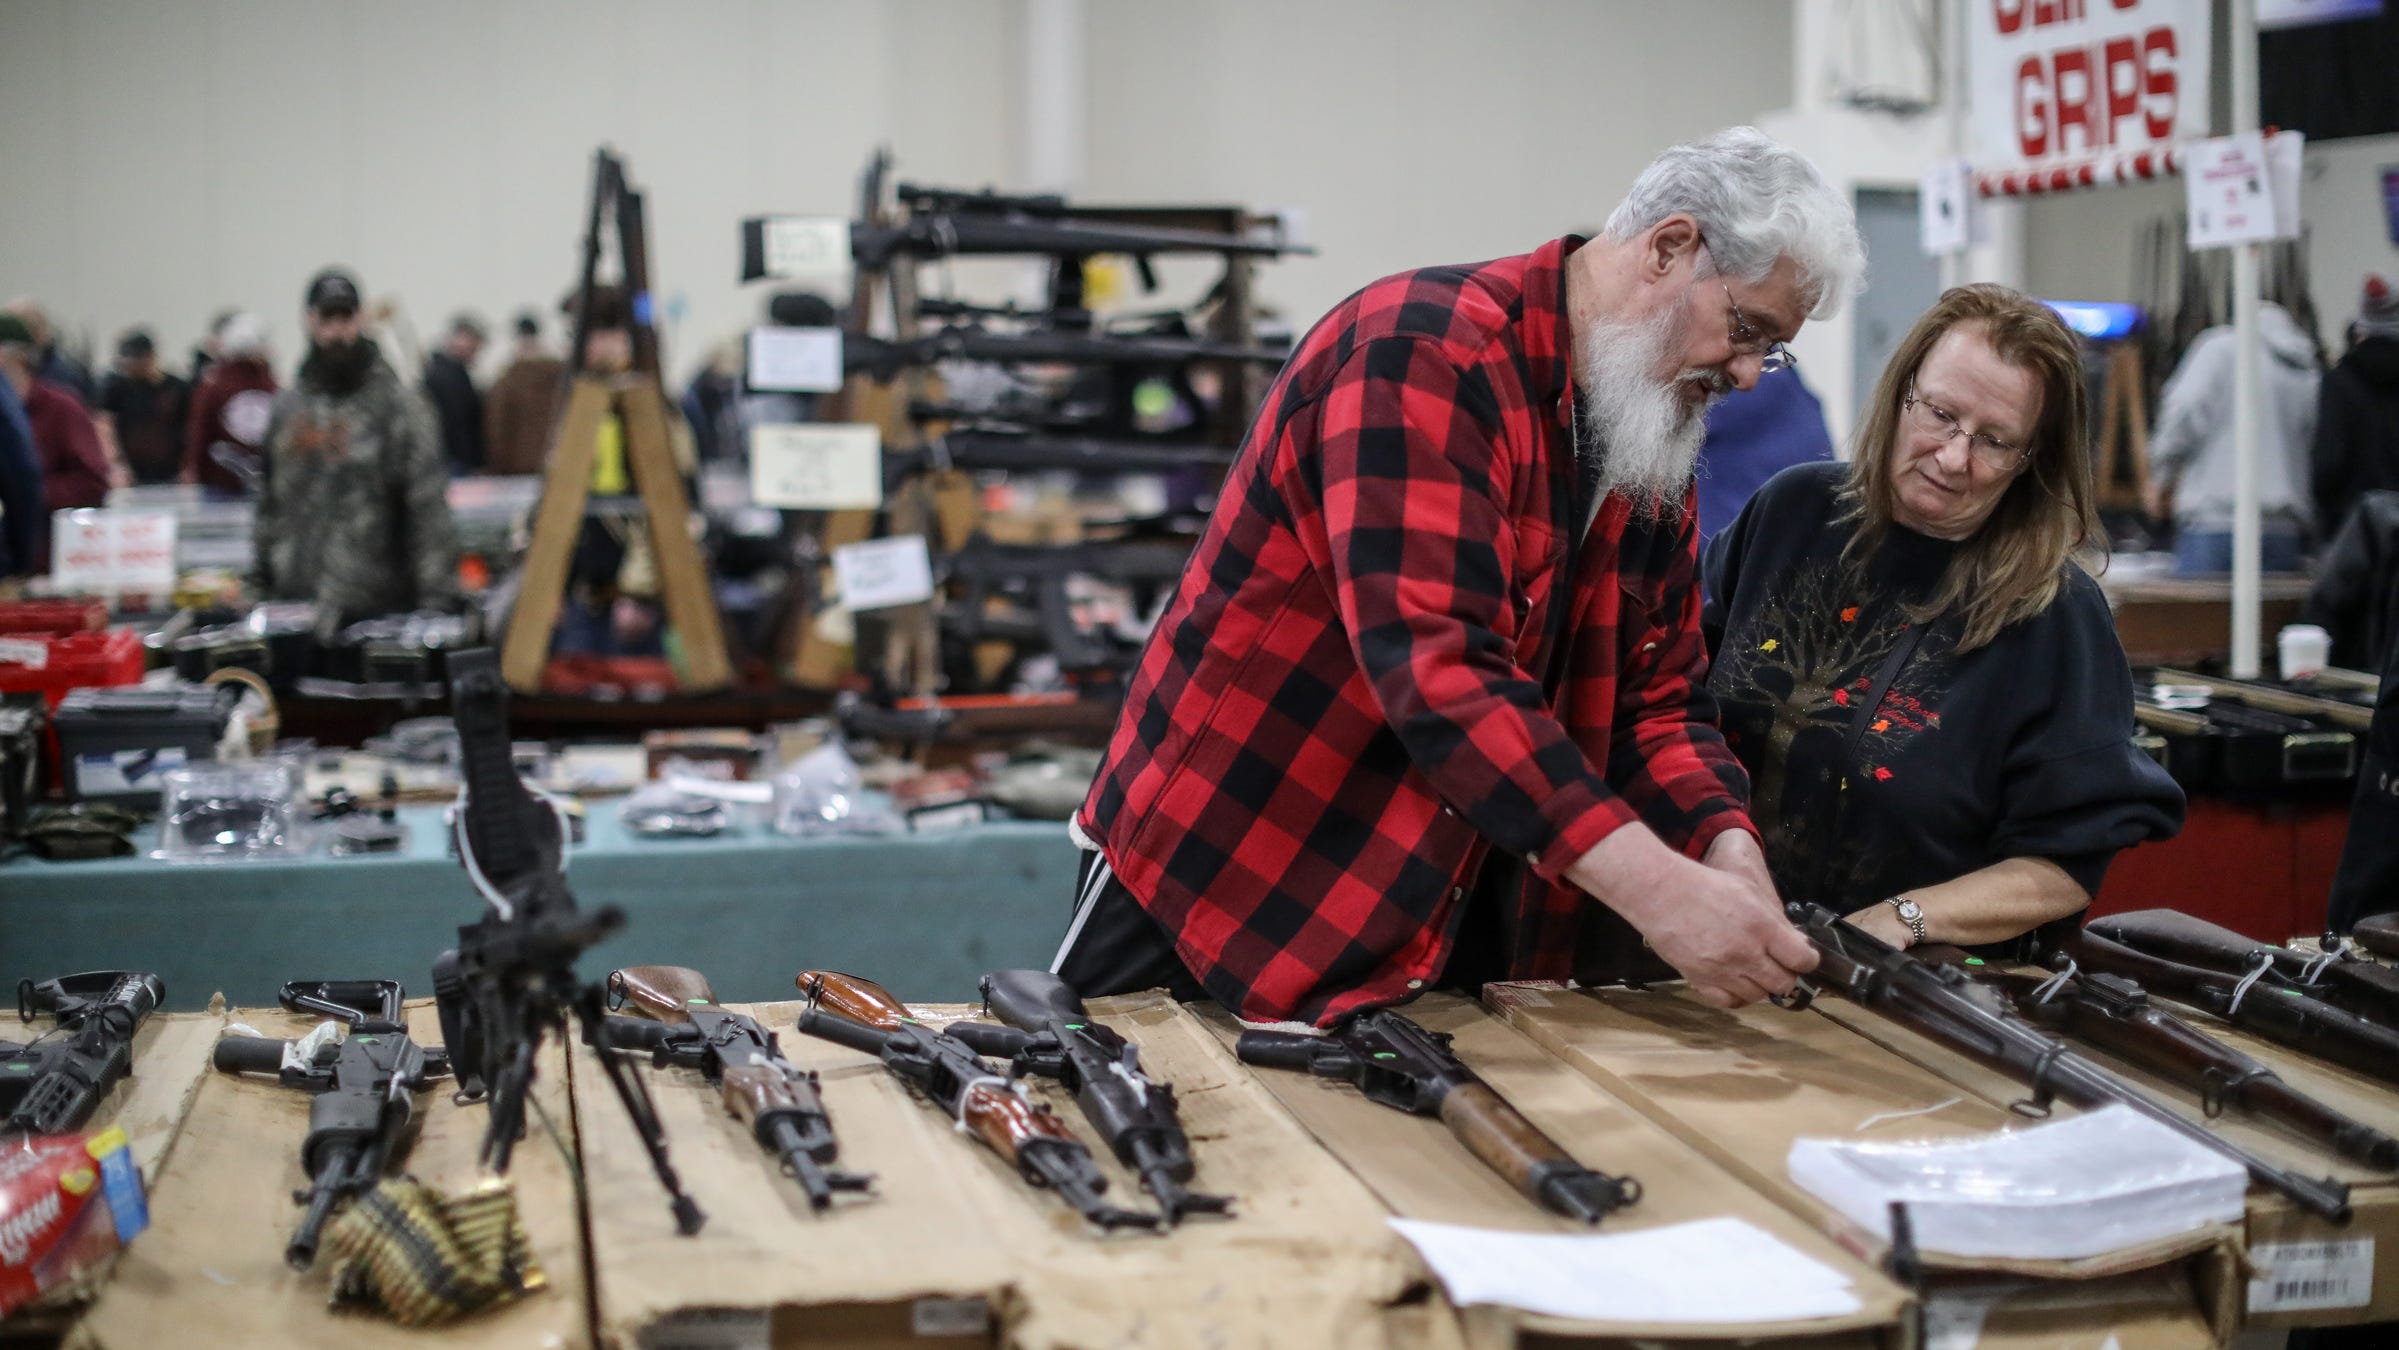 Mike Sadley, 64, and his wife, Jennie Sadley, 59, both of Wayne look over different guns, during the Novi Gun and Knife Show at Suburban Collection Showplace in Novi, Mich. on Feb. 24, 2018.